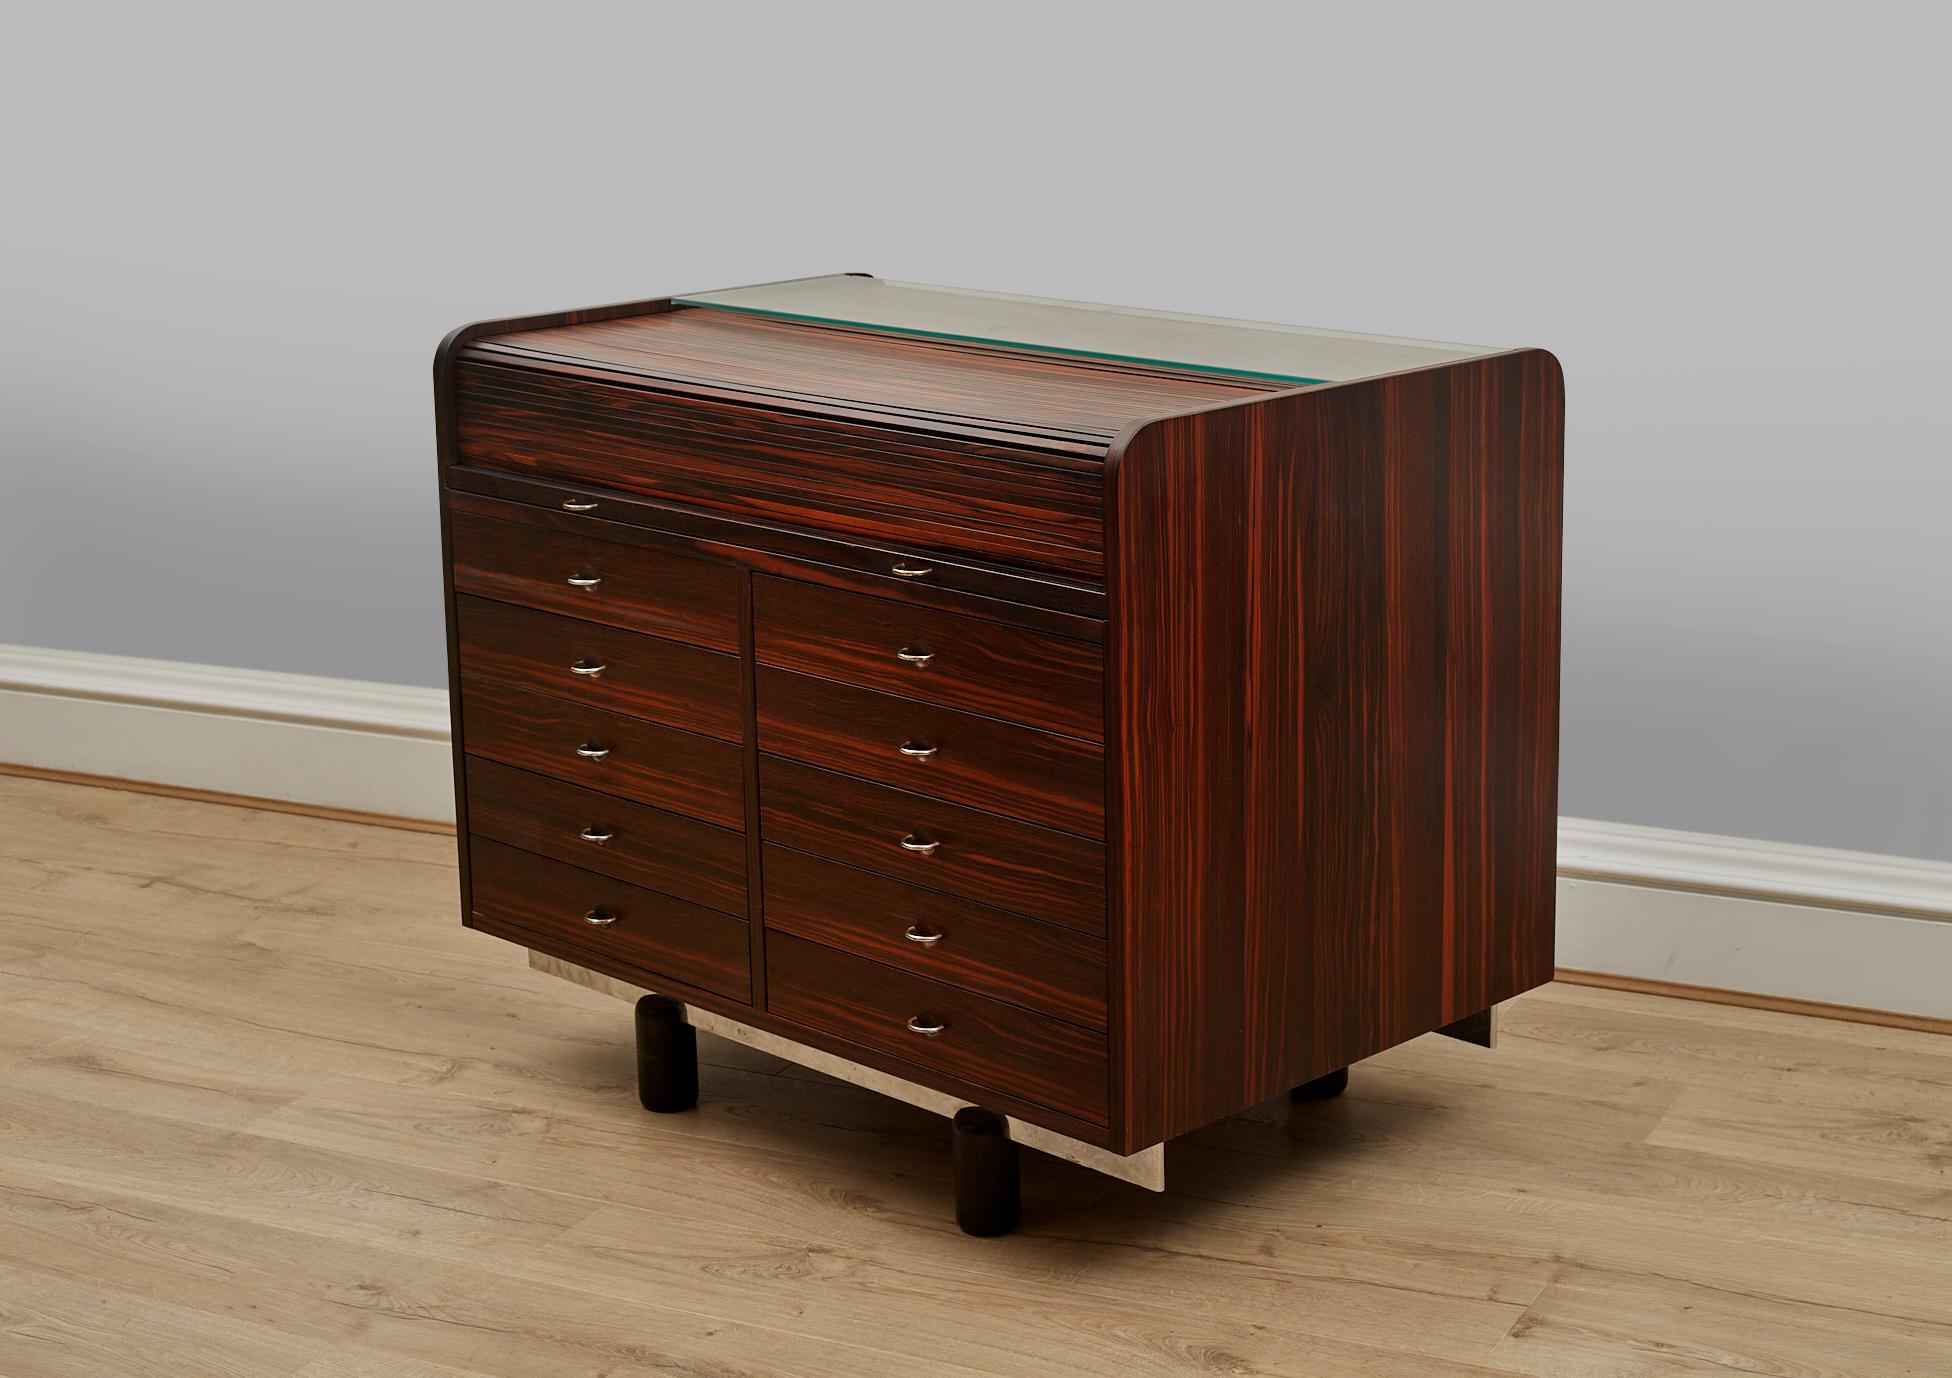 Leather Rosewood Rolltop Desk, Storage Cabinet by Gianfranco Frattini 1960s